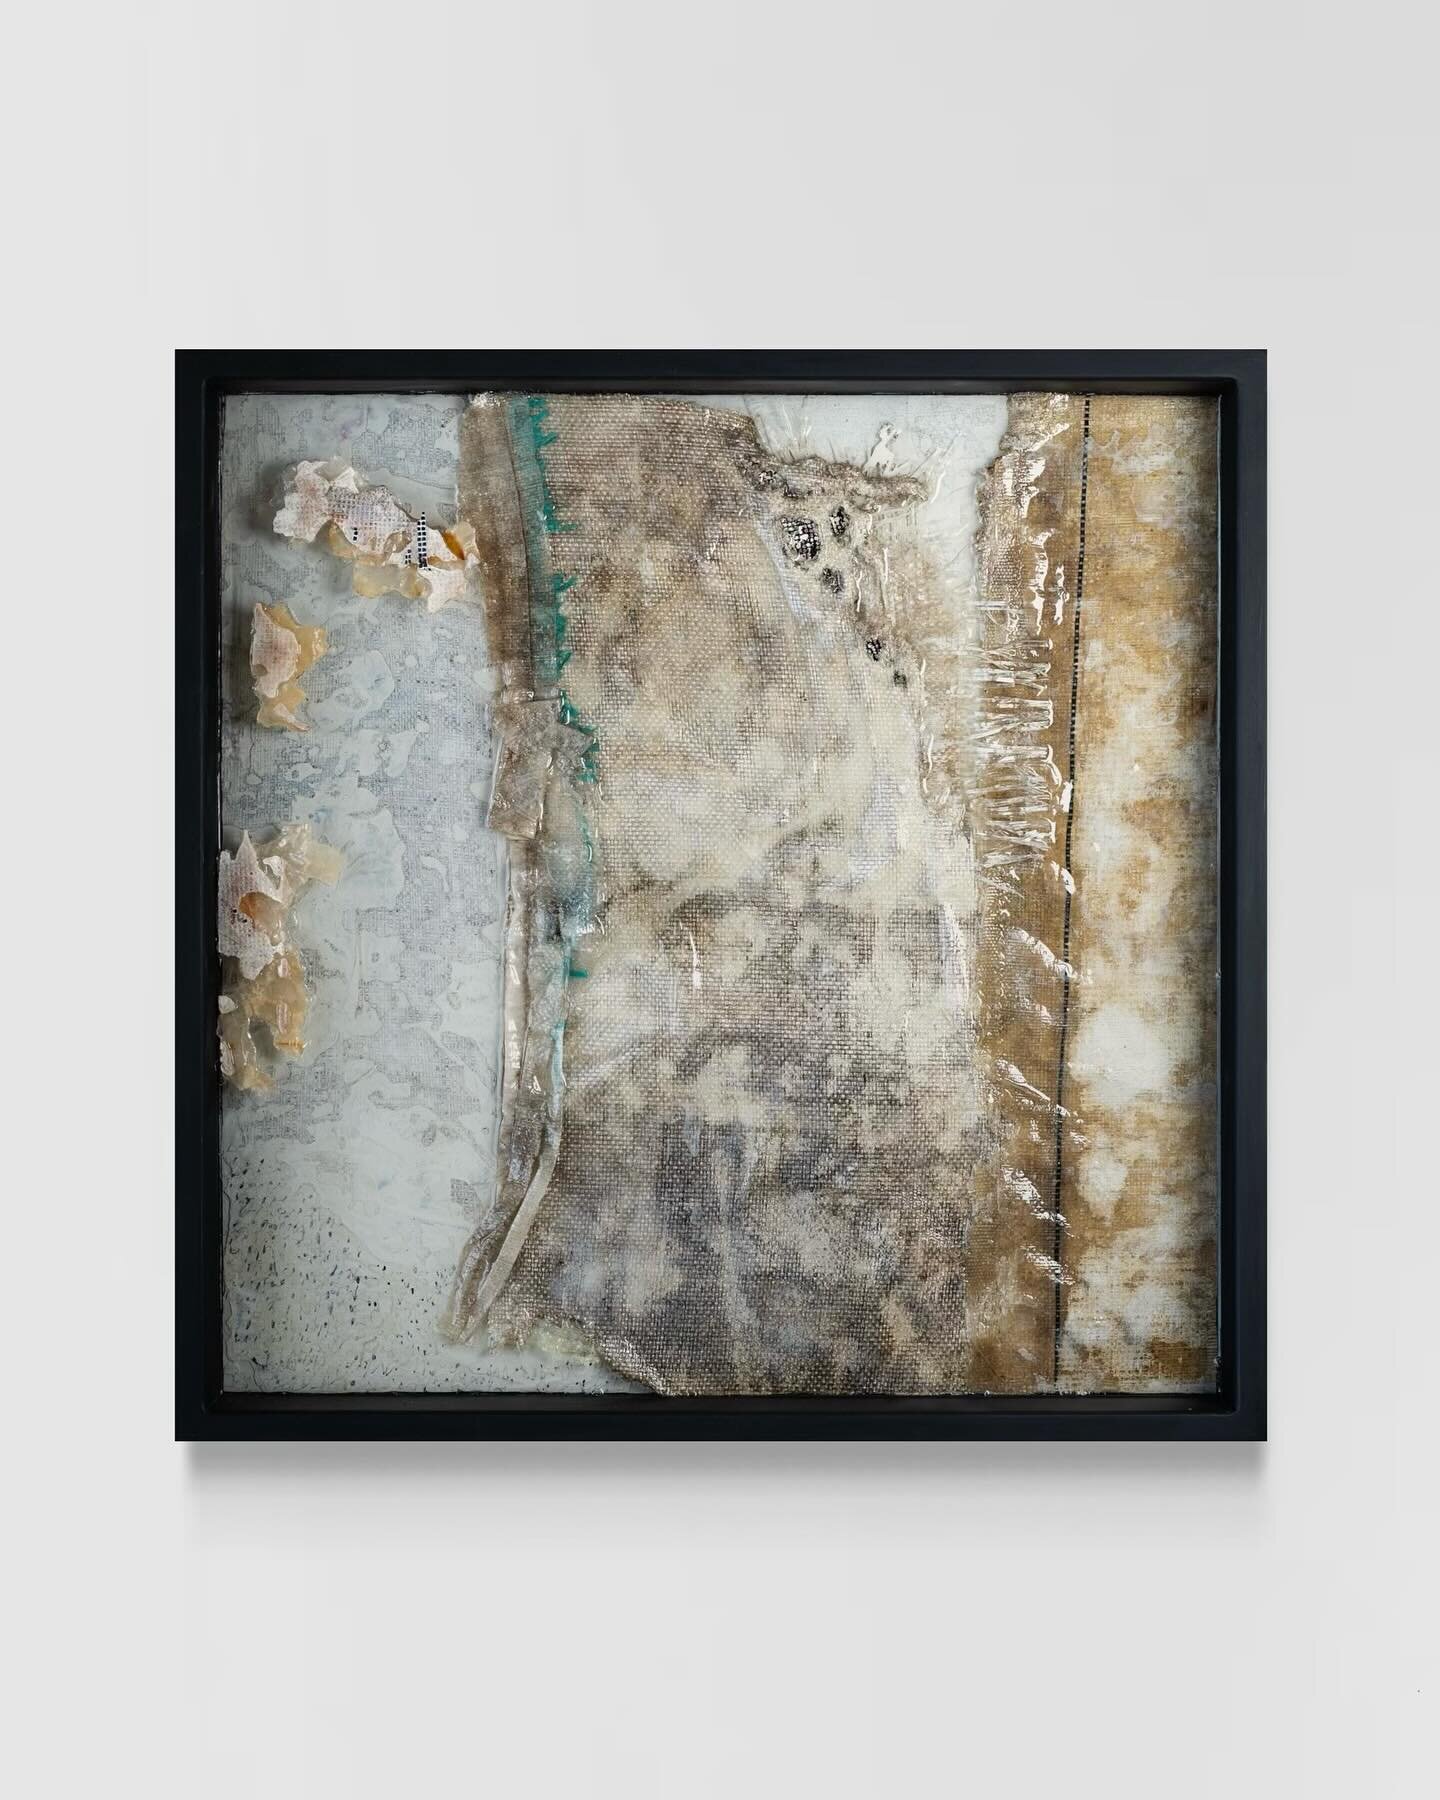 &ldquo;Feather Report #1&rdquo;, found landscaping fabric, found tarp, coffee filter, billboard tarp, and resin, 24x24&rdquo;, 2024

I love the way these discarded materials carry the scars of the life they lived before.  One could guess what might h